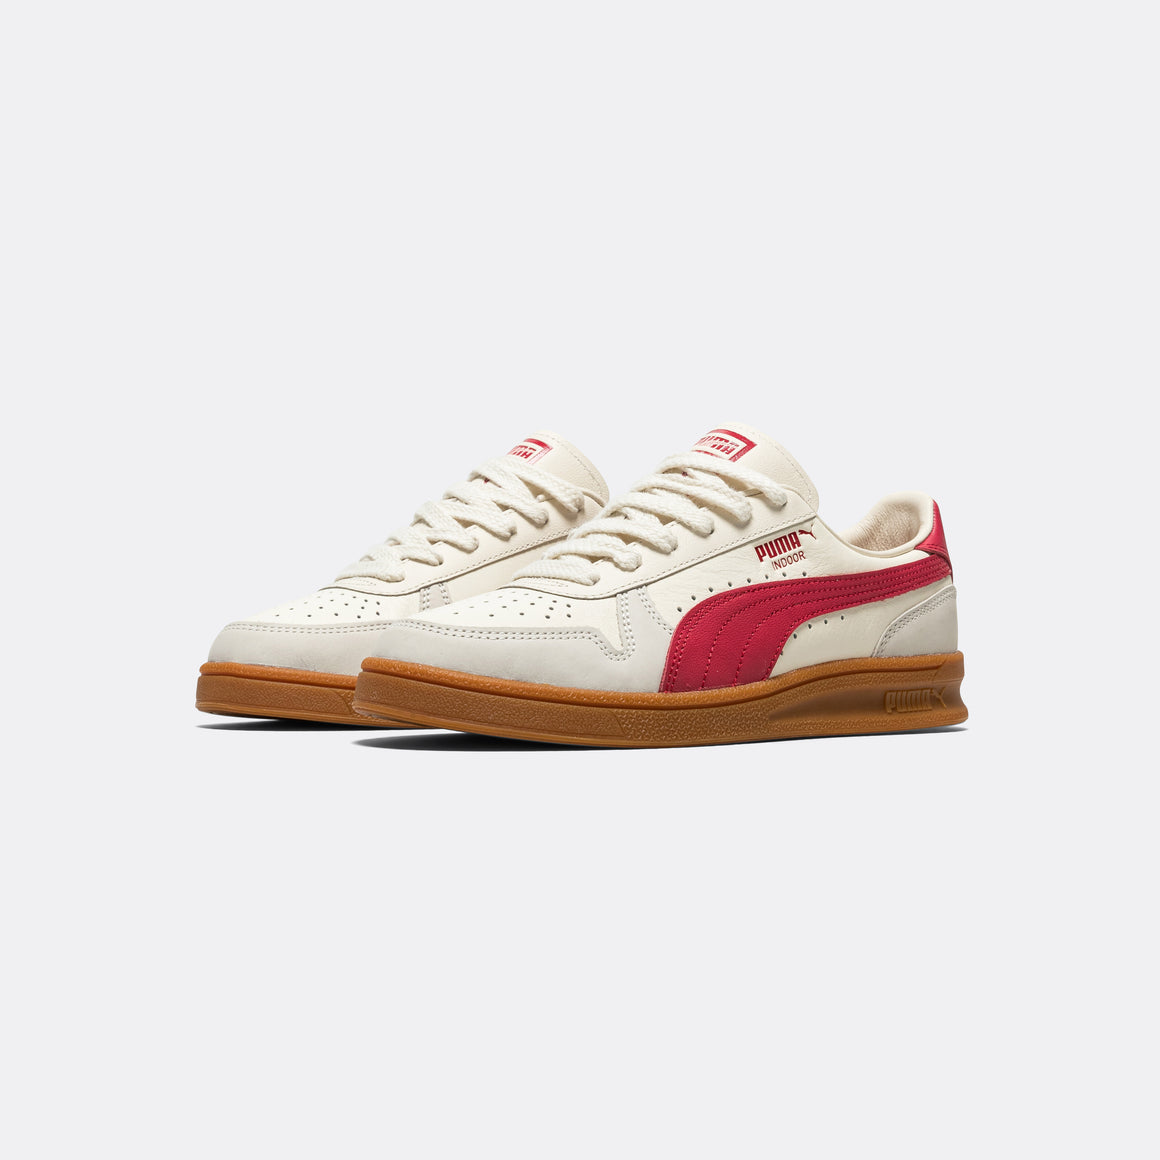 Puma - Indoor OG - Frosted Ivory/Club Red - UP THERE